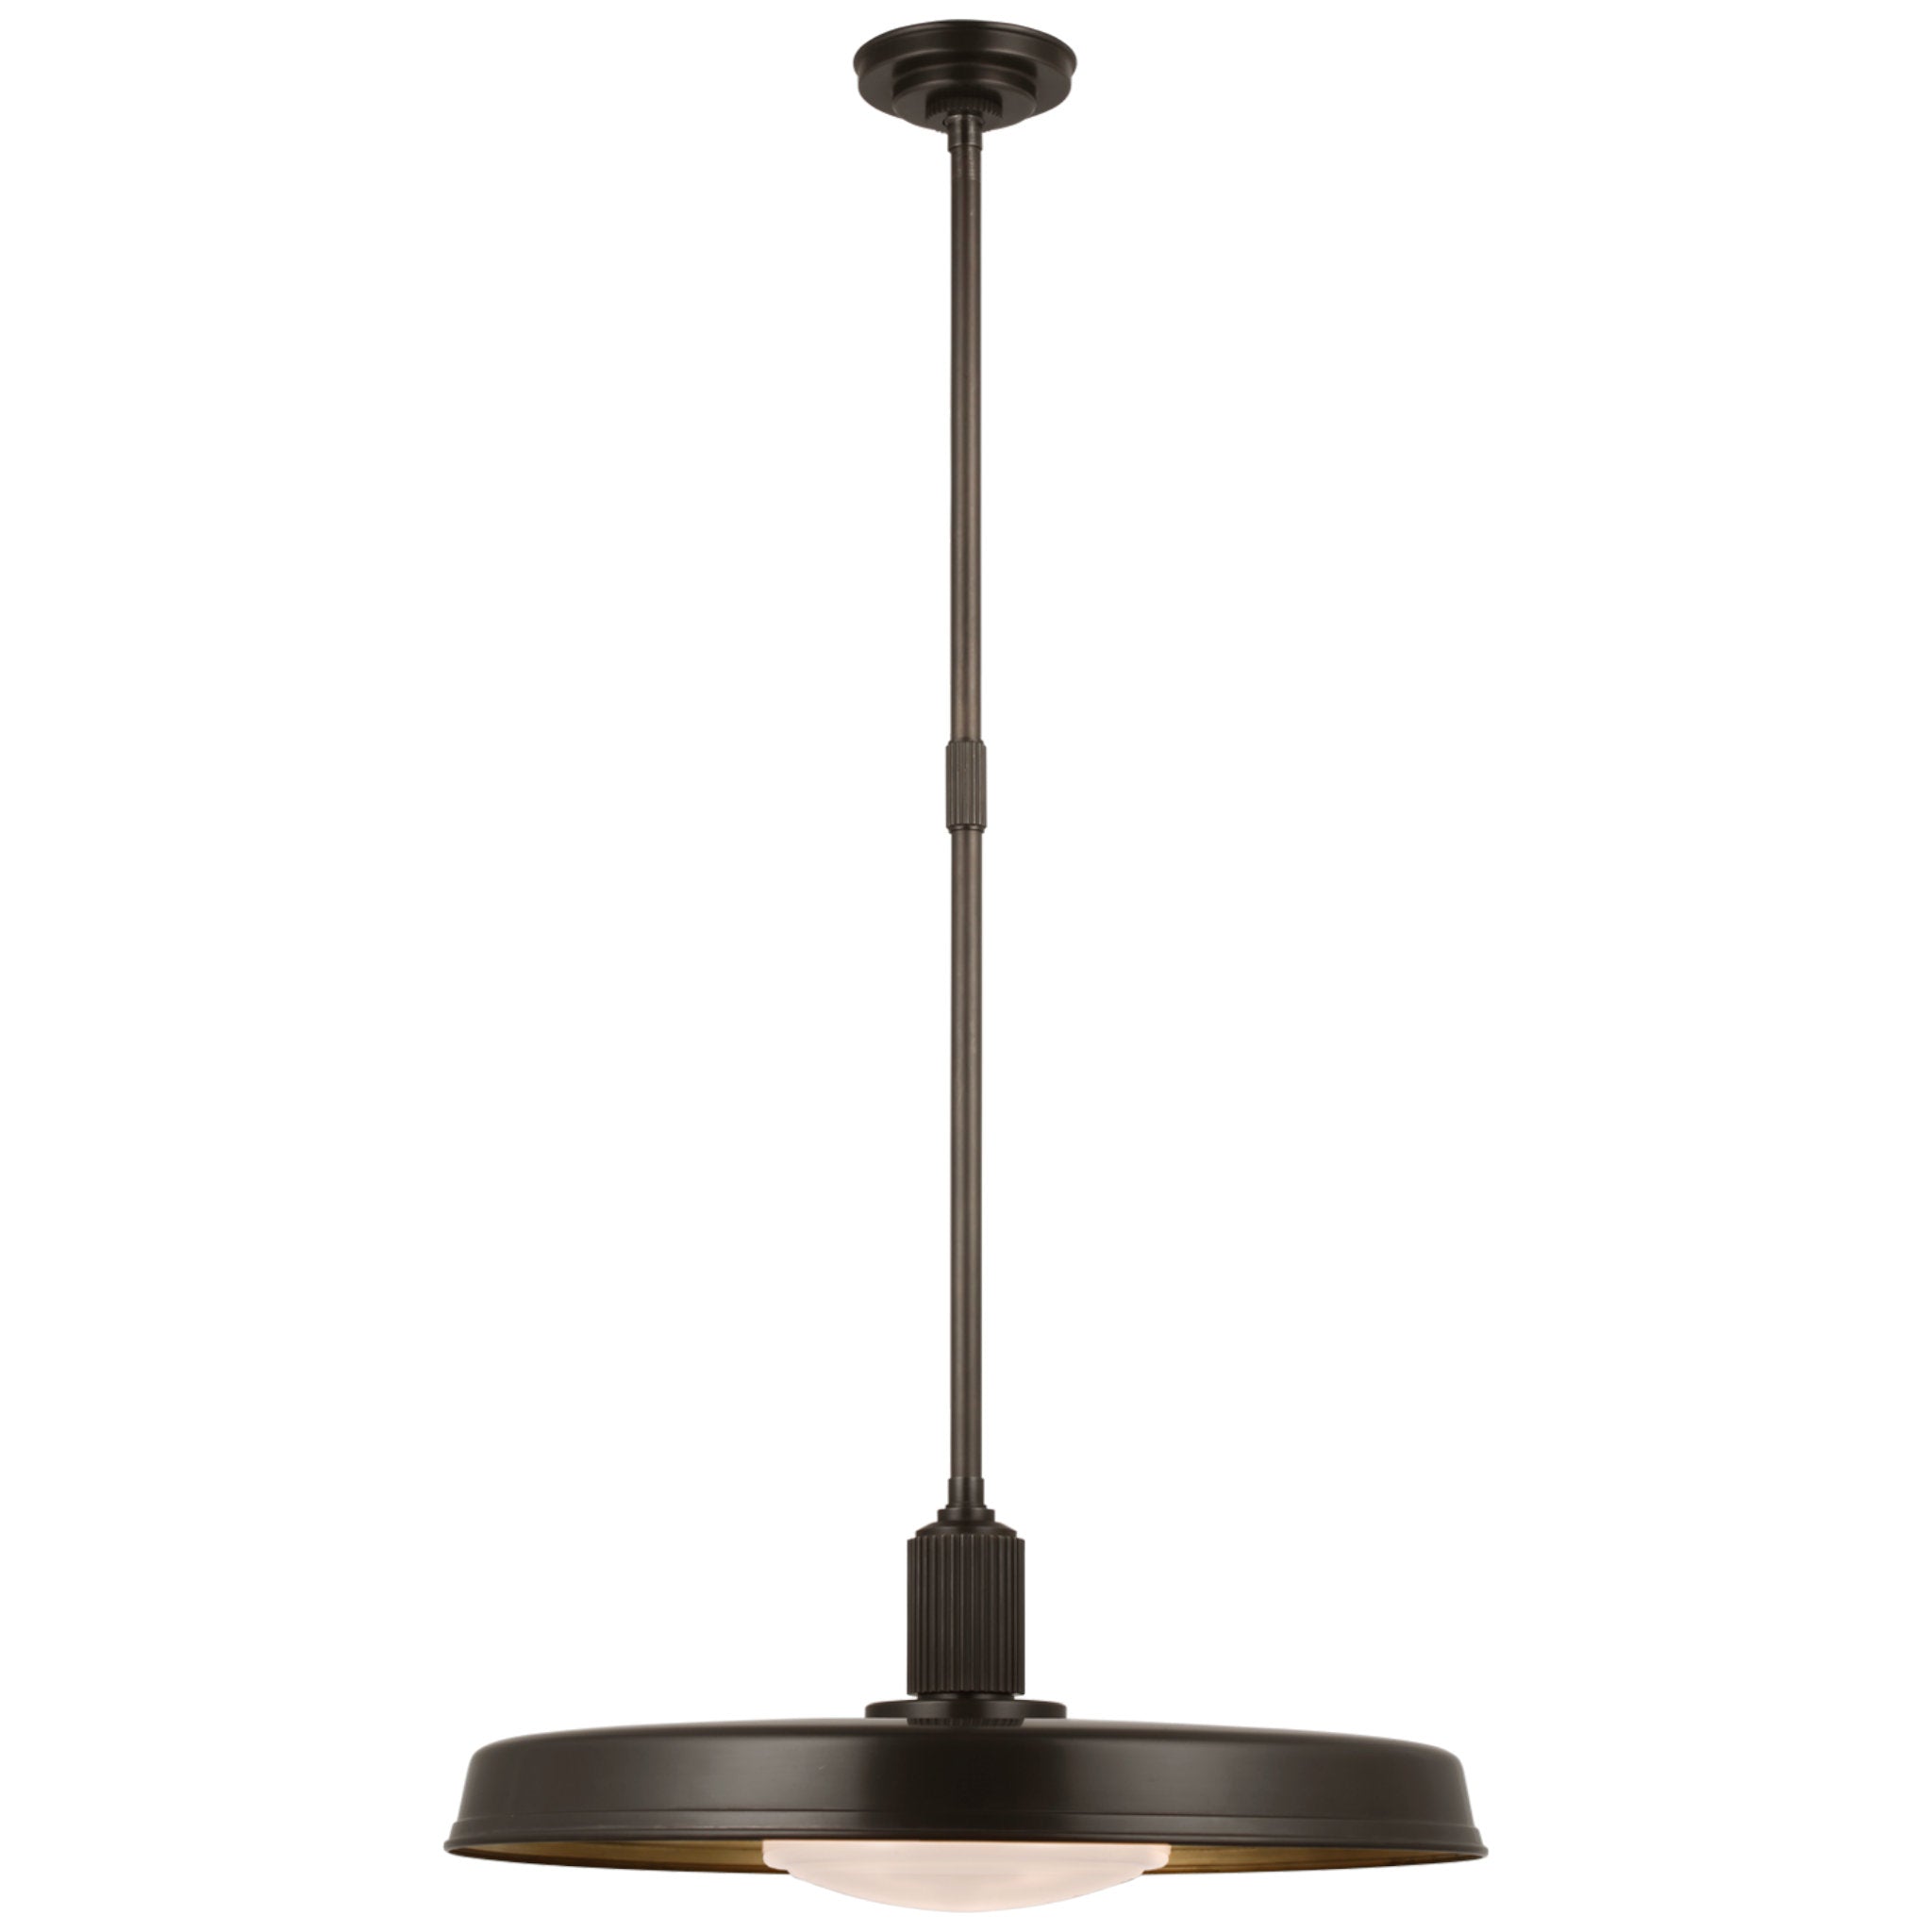 Chapman & Myers Ruhlmann 24" Factory Pendant in Bronze with White Glass and Brass Interior